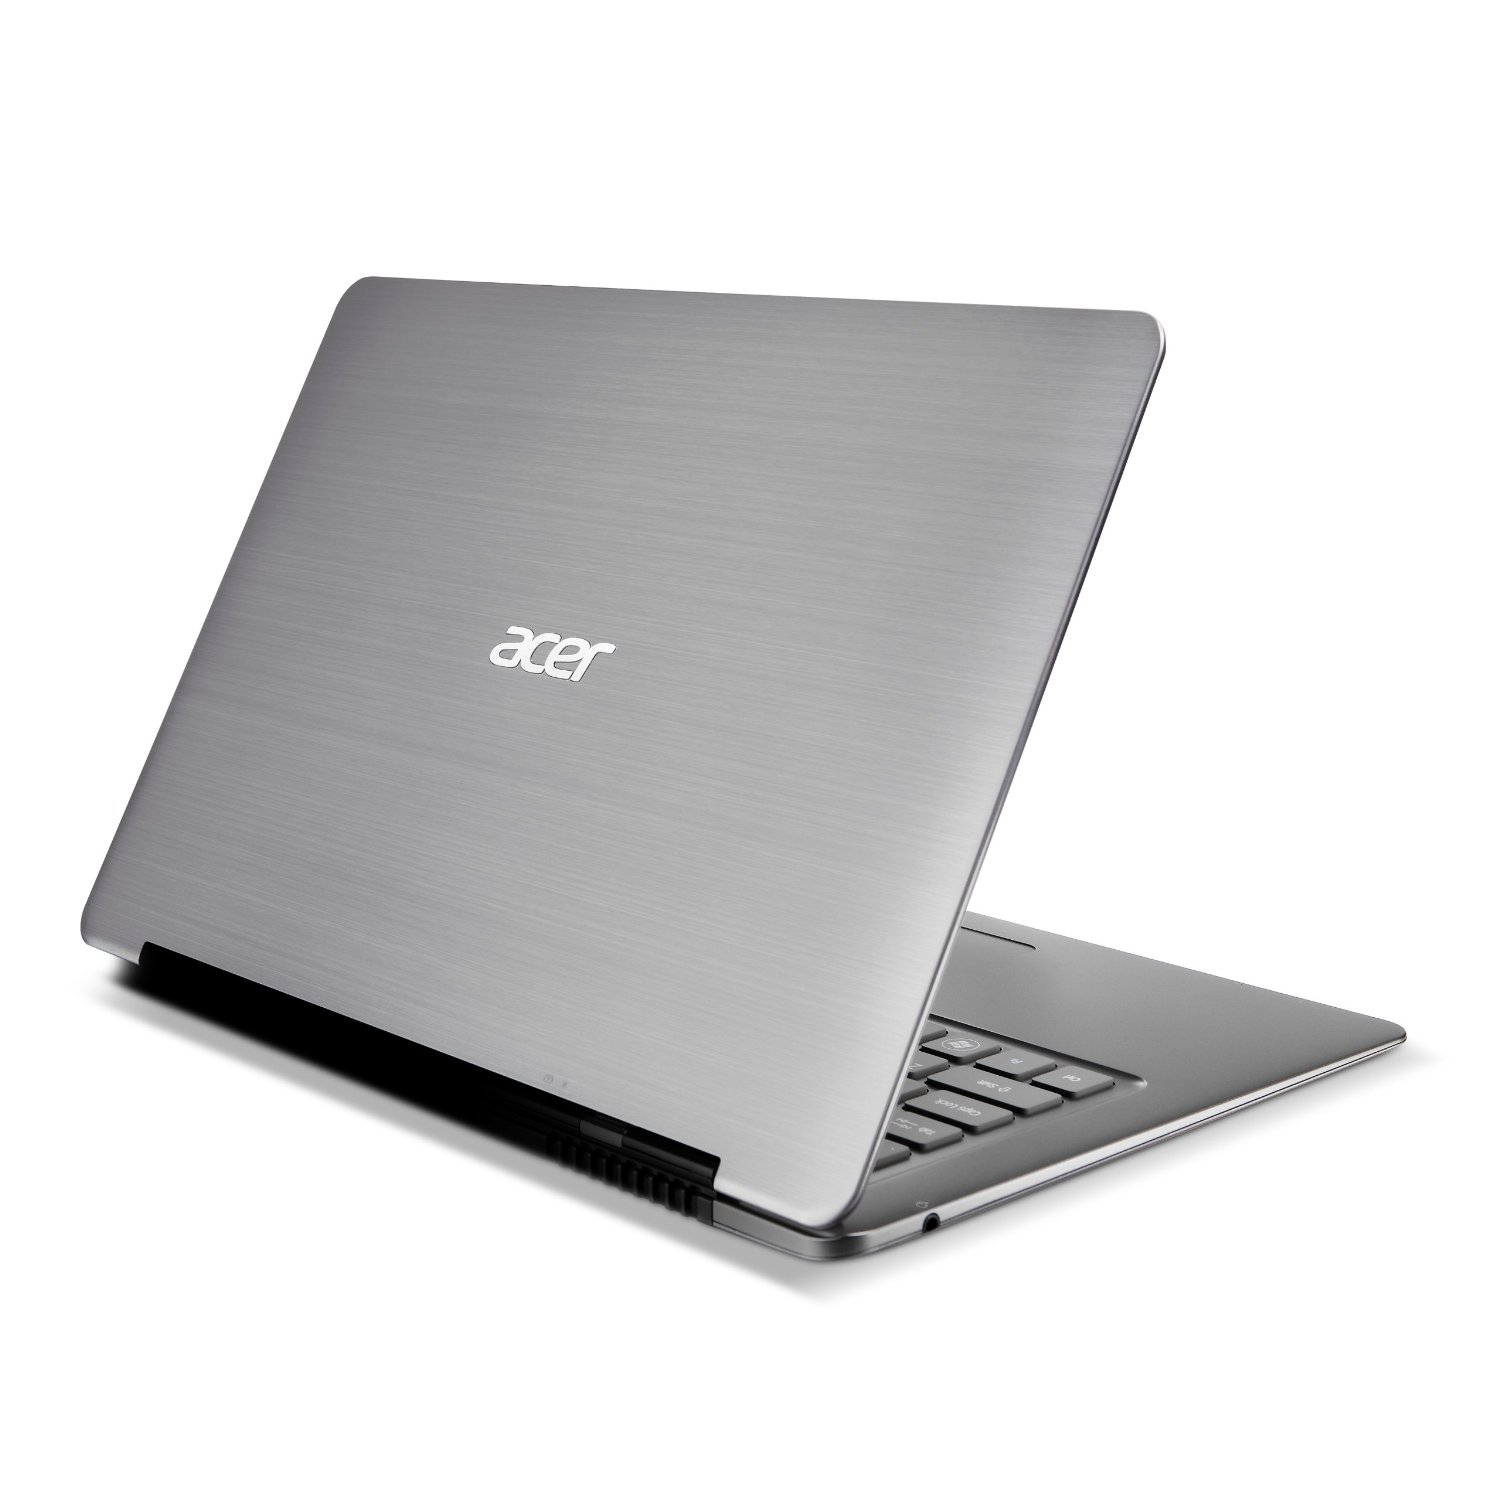 http://thetechjournal.com/wp-content/uploads/images/1111/1322192769-acer-aspire-s39516828-133inch-hd-display-ultrabook-6.jpg